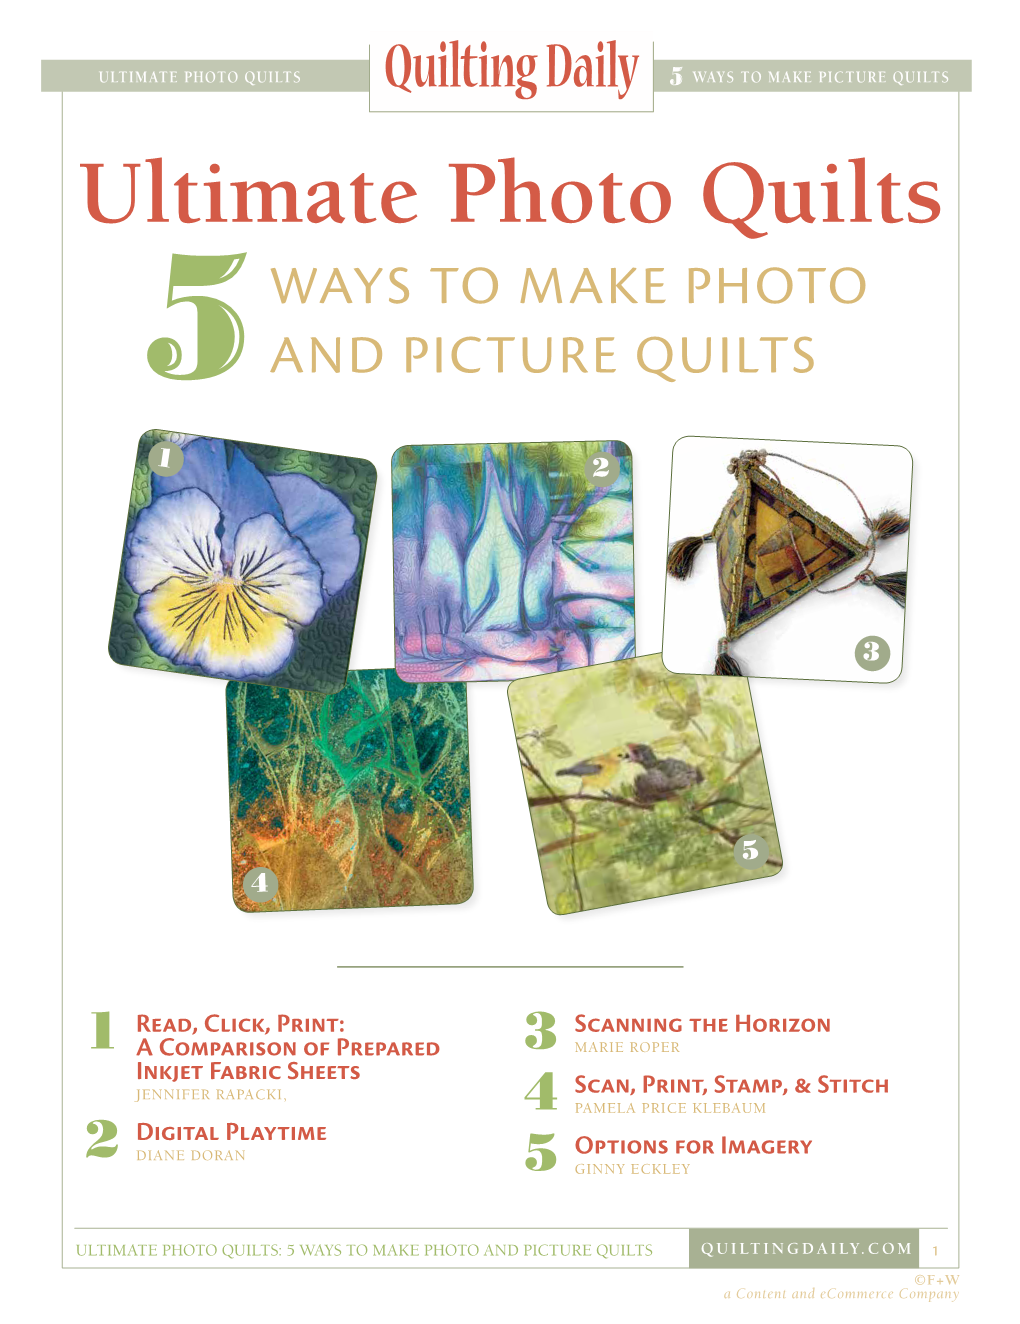 ULTIMATE PHOTO QUILTS Quilting Daily 5 WAYS to MAKE PICTURE QUILTS Ultimate Photo Quilts WAYS to MAKE PHOTO 5 and PICTURE QUILTS